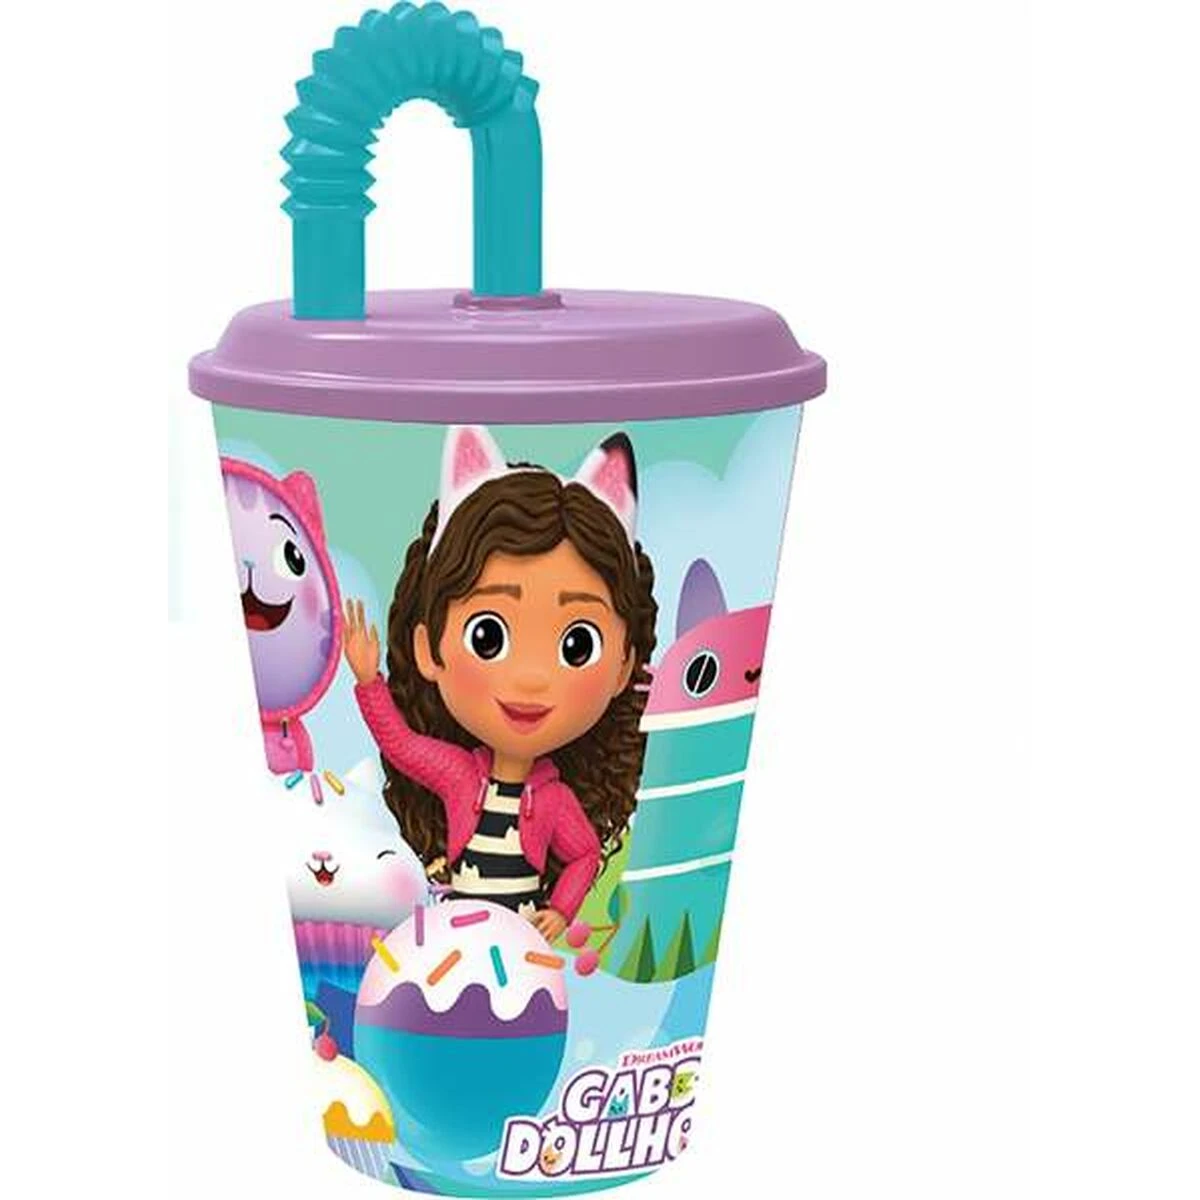 Cup with straw, cartoon design, smiling character.